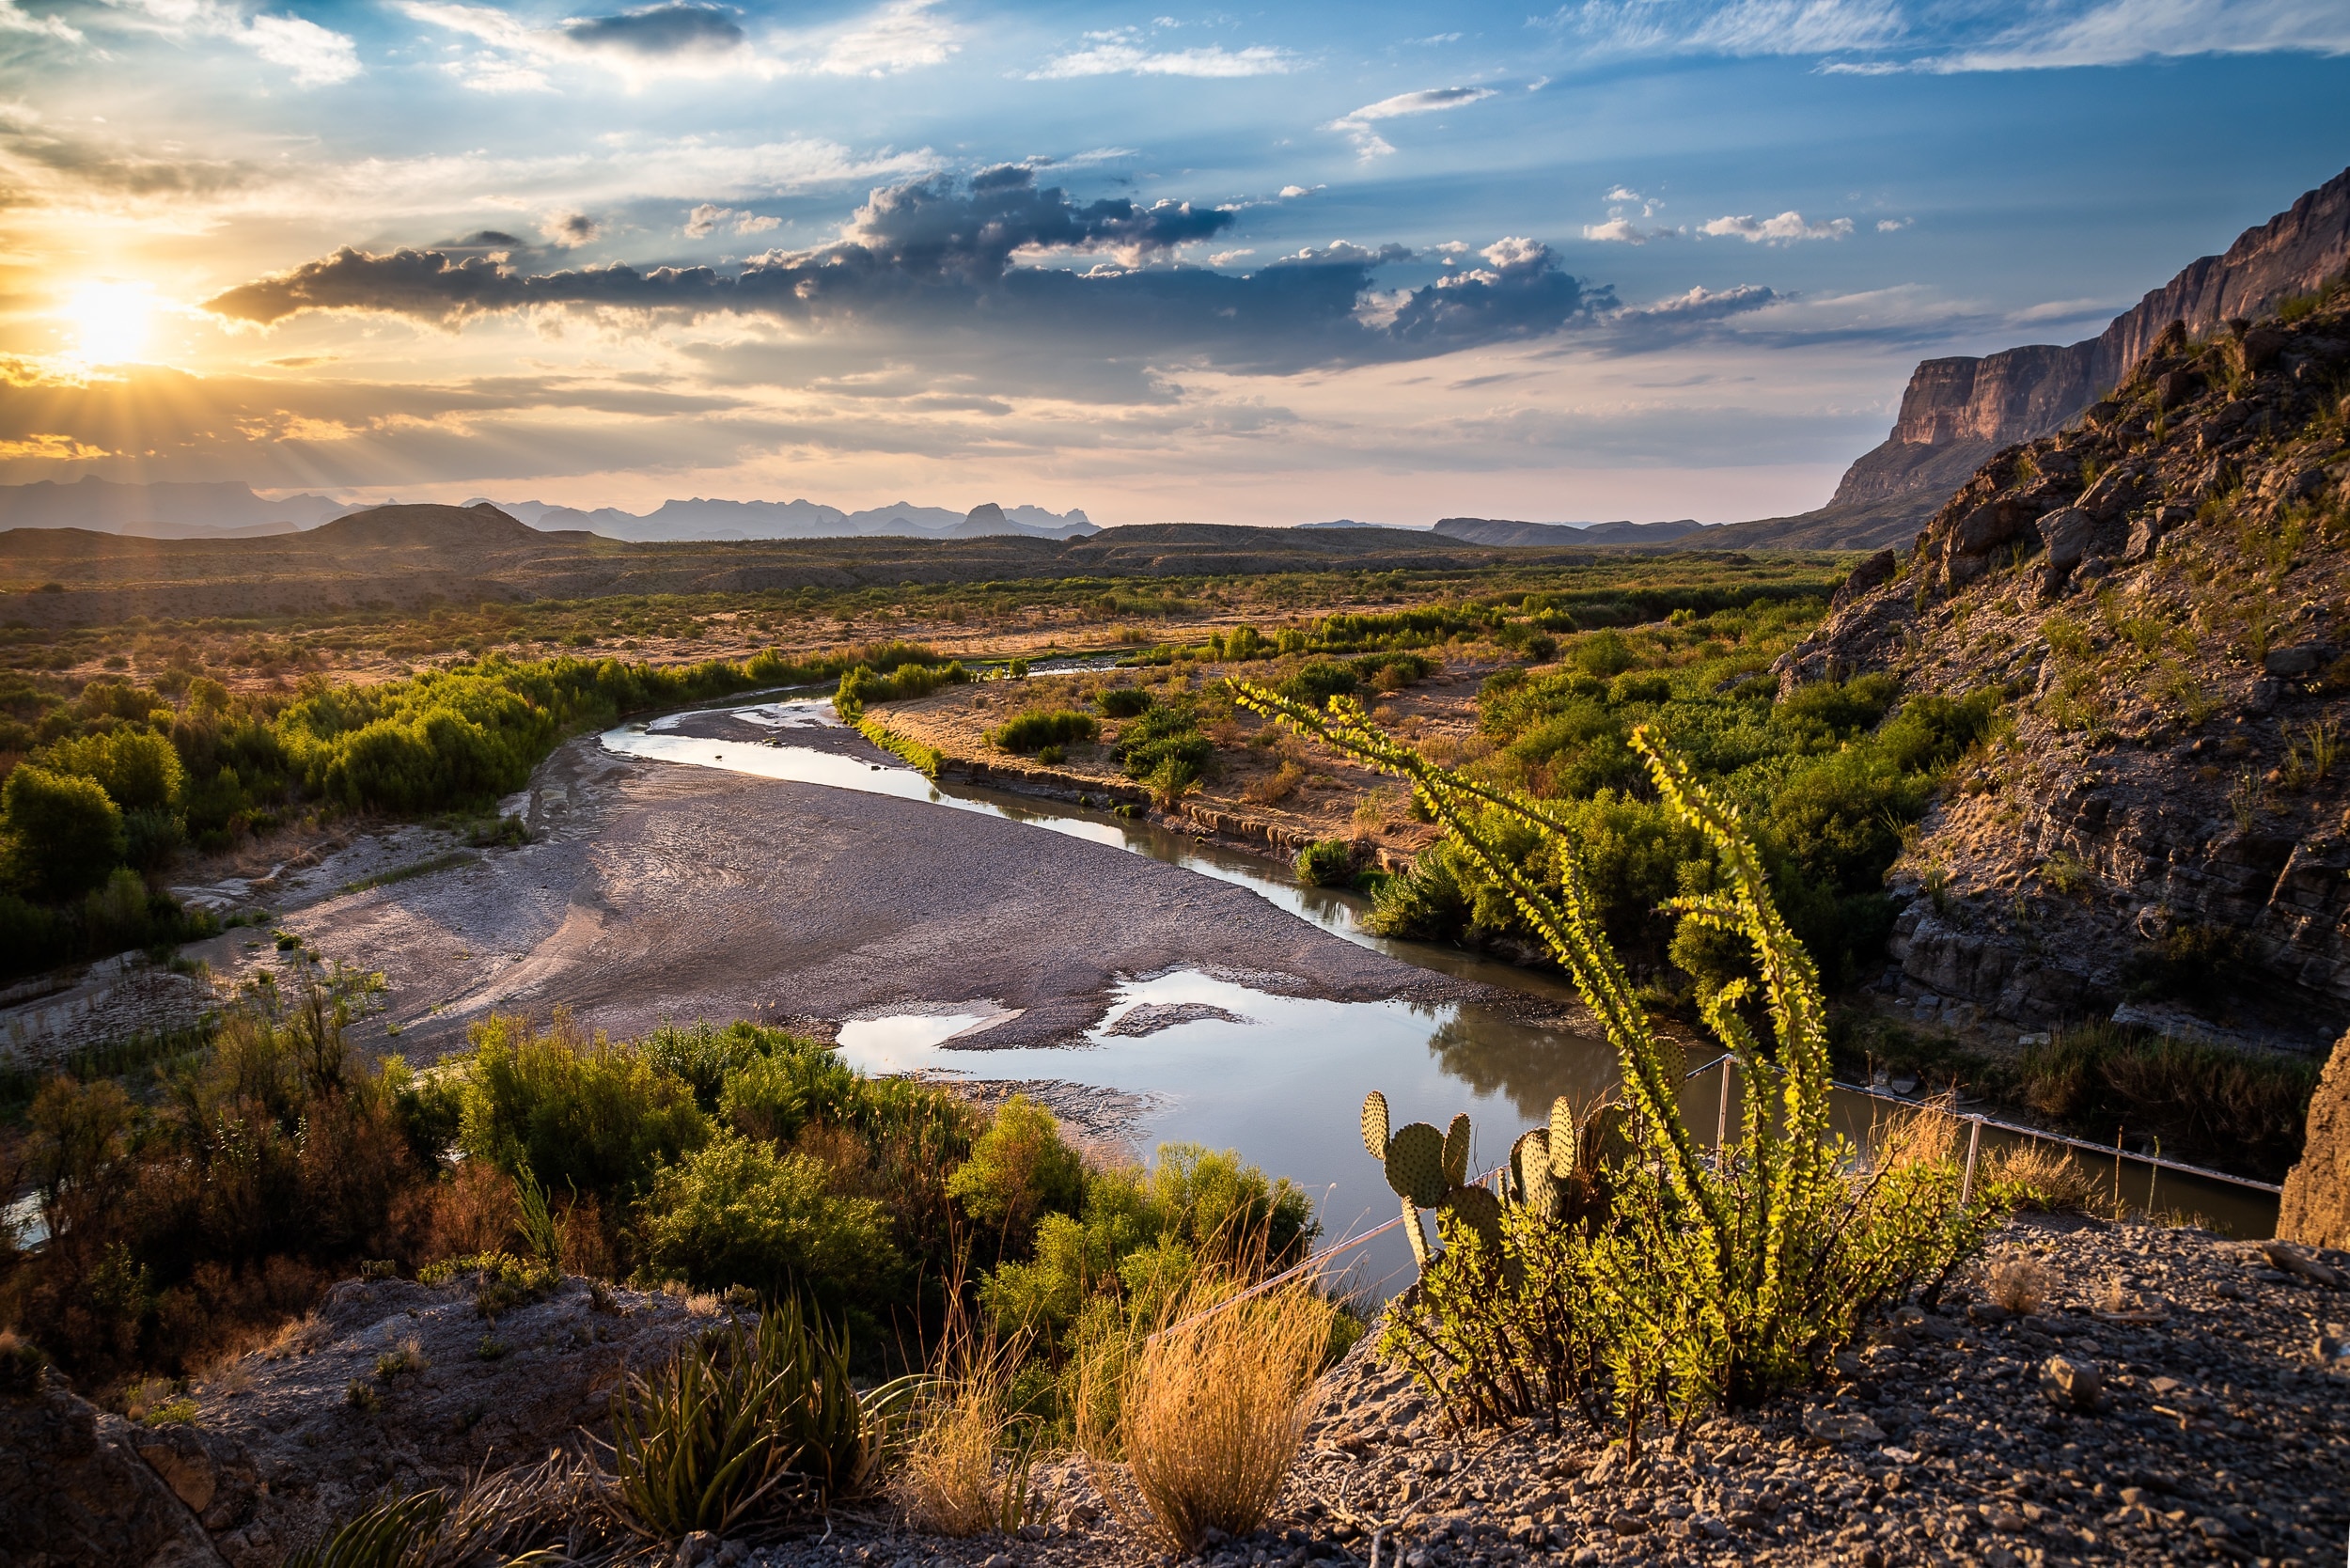 View from the mouth of Santa Elena Canyon in Big Bend